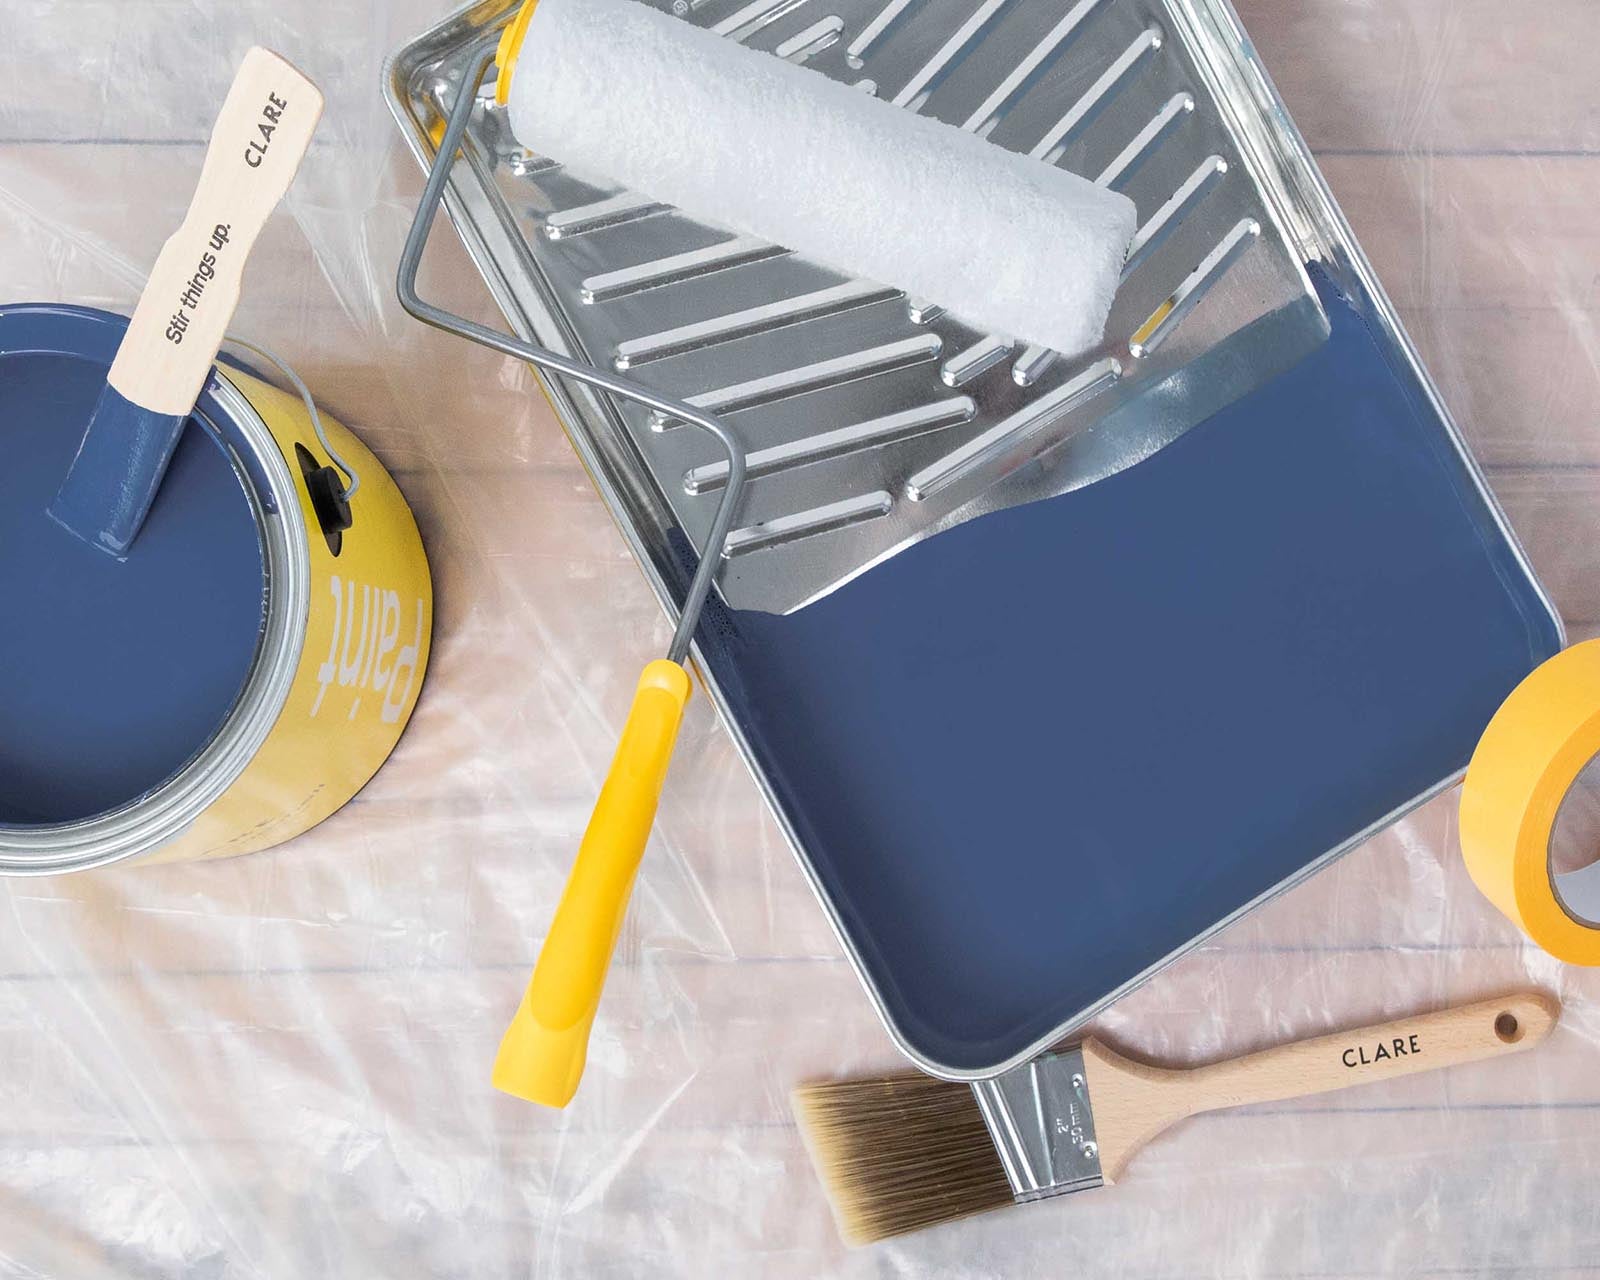 Everything you need to know about paint coverage, including how much a gallon of paint covers, and how to calculate exactly how much paint you need.